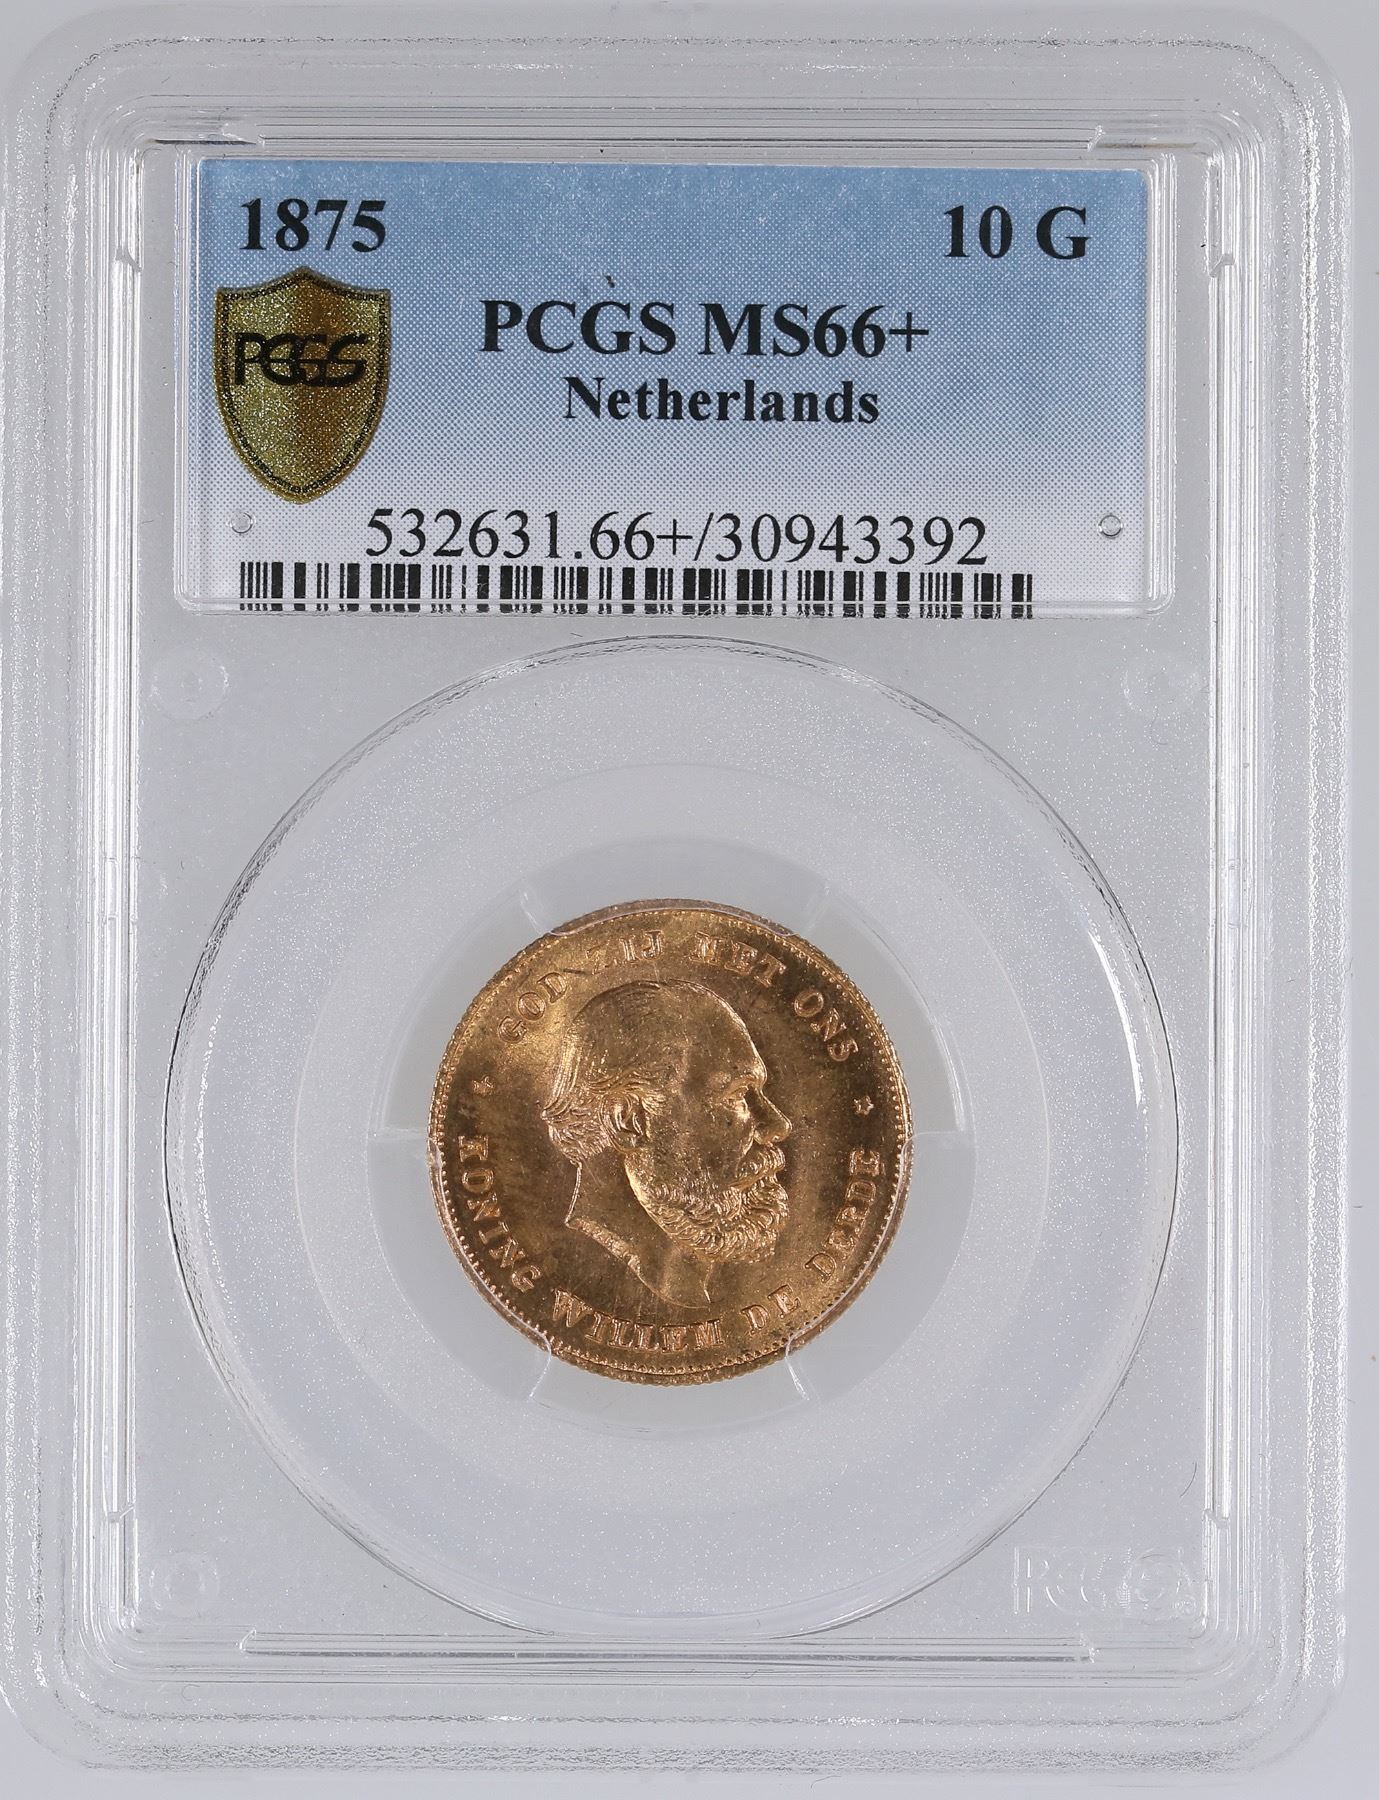 The World's Most Valuable Coin Sells at Auction for $18.9 Million, Smart  News